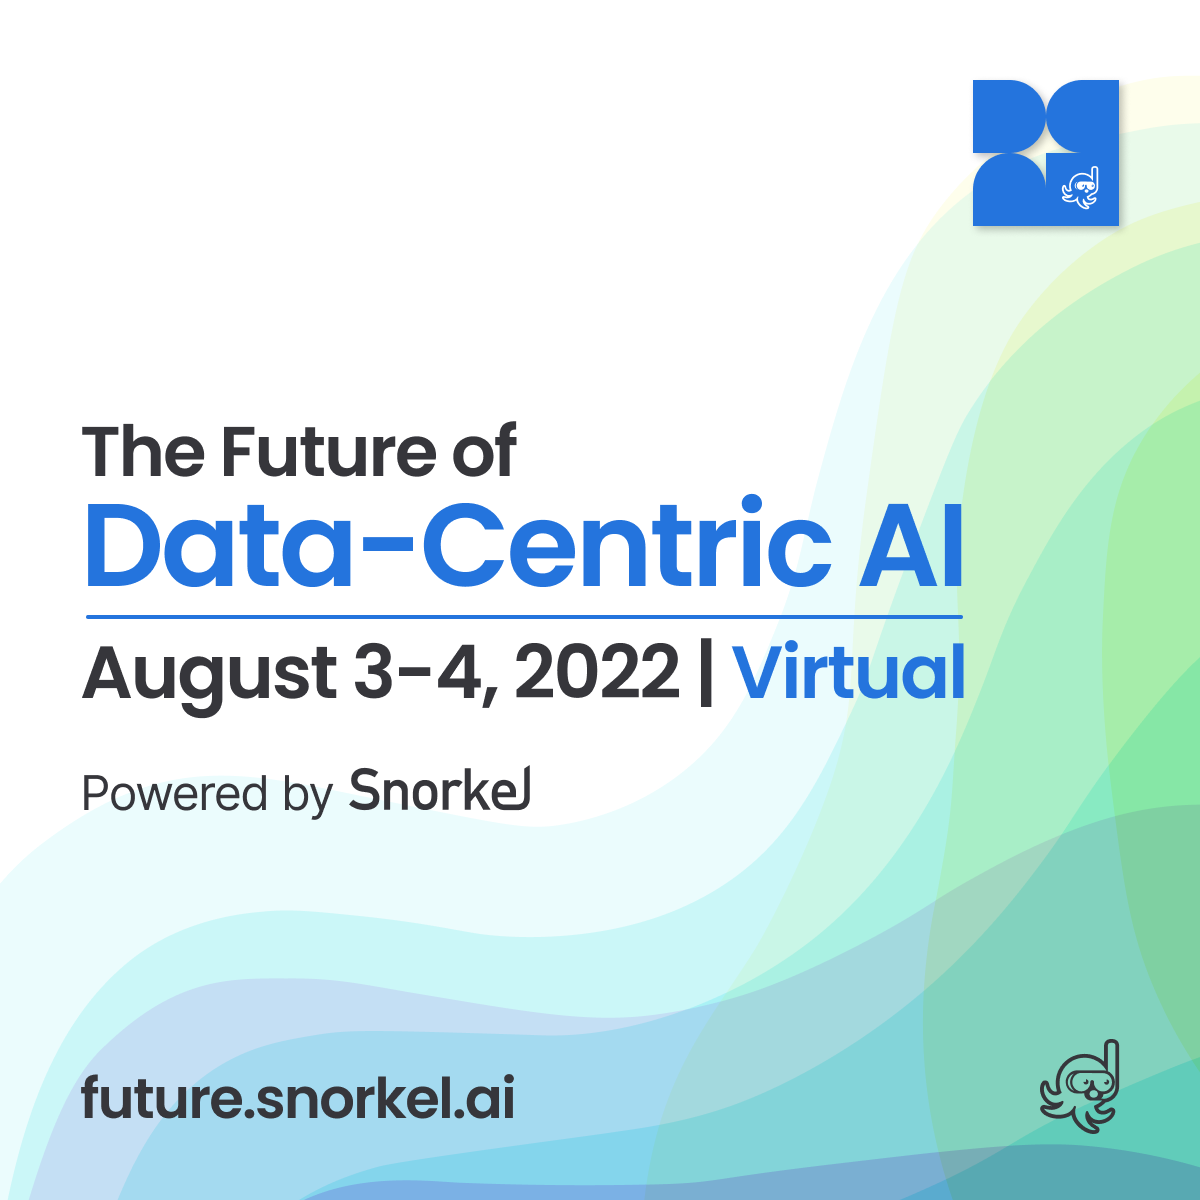 The future of data-centric AI presented by Snorkel AI